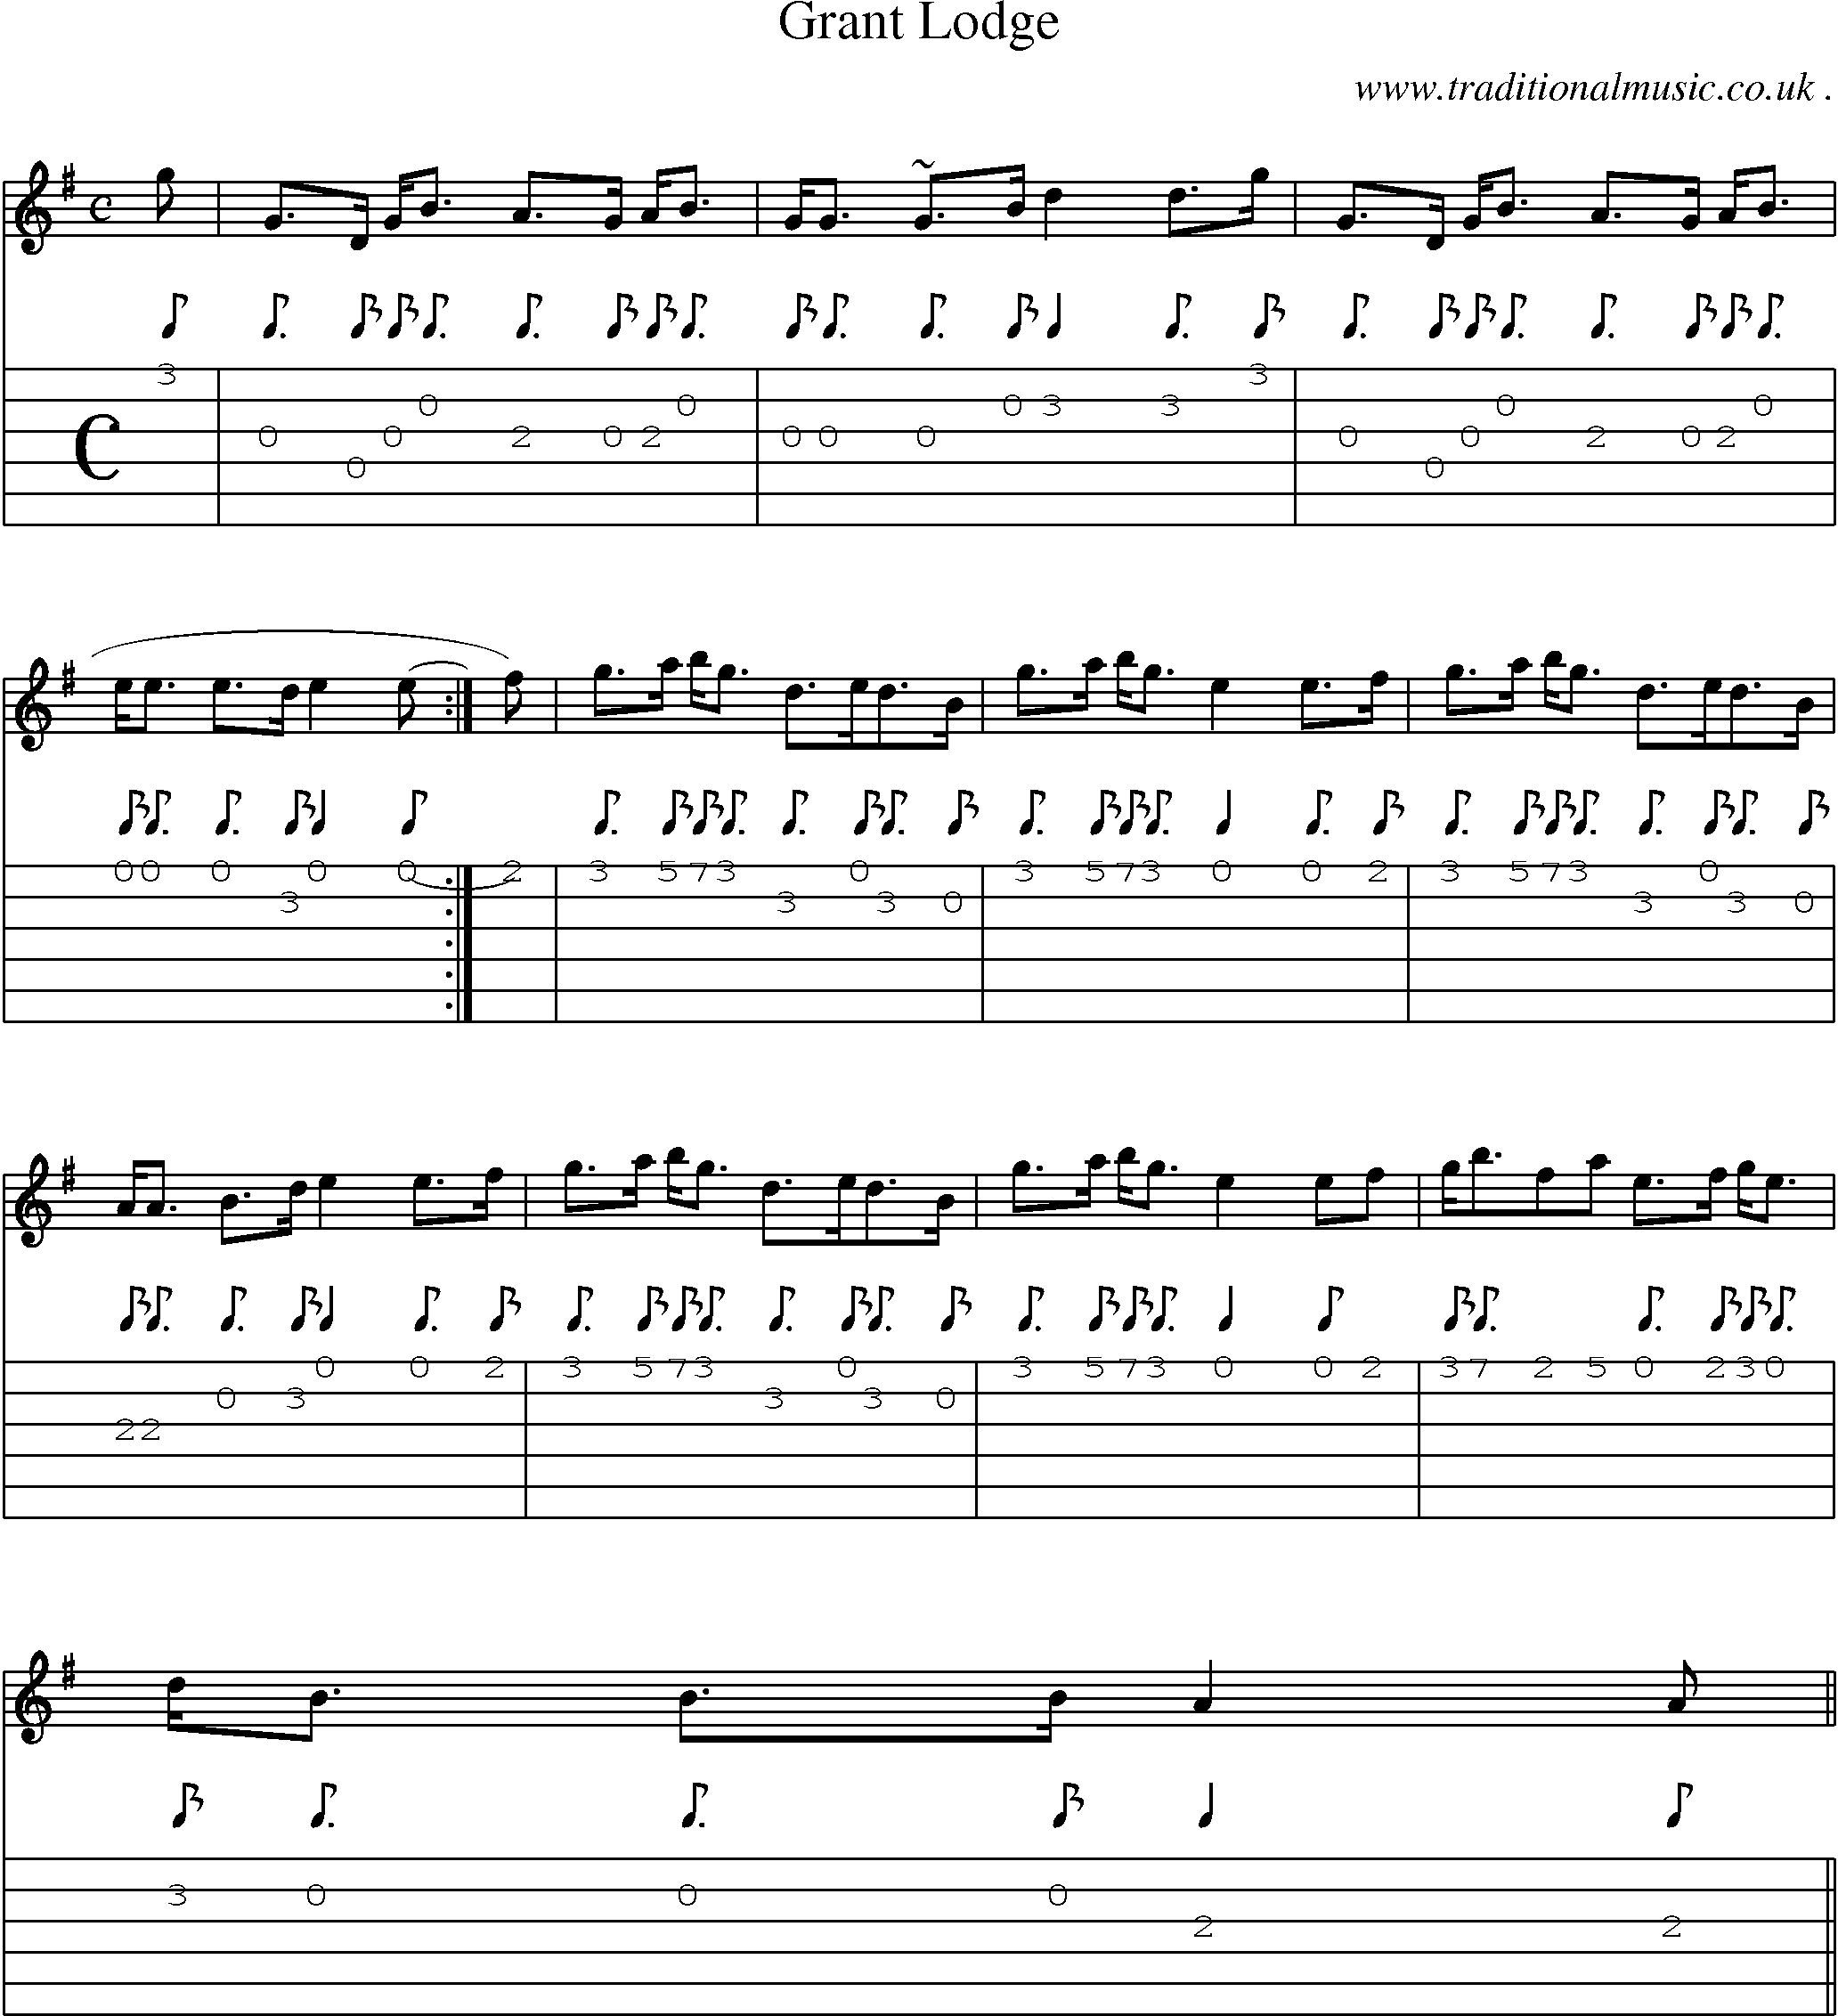 Sheet-music  score, Chords and Guitar Tabs for Grant Lodge